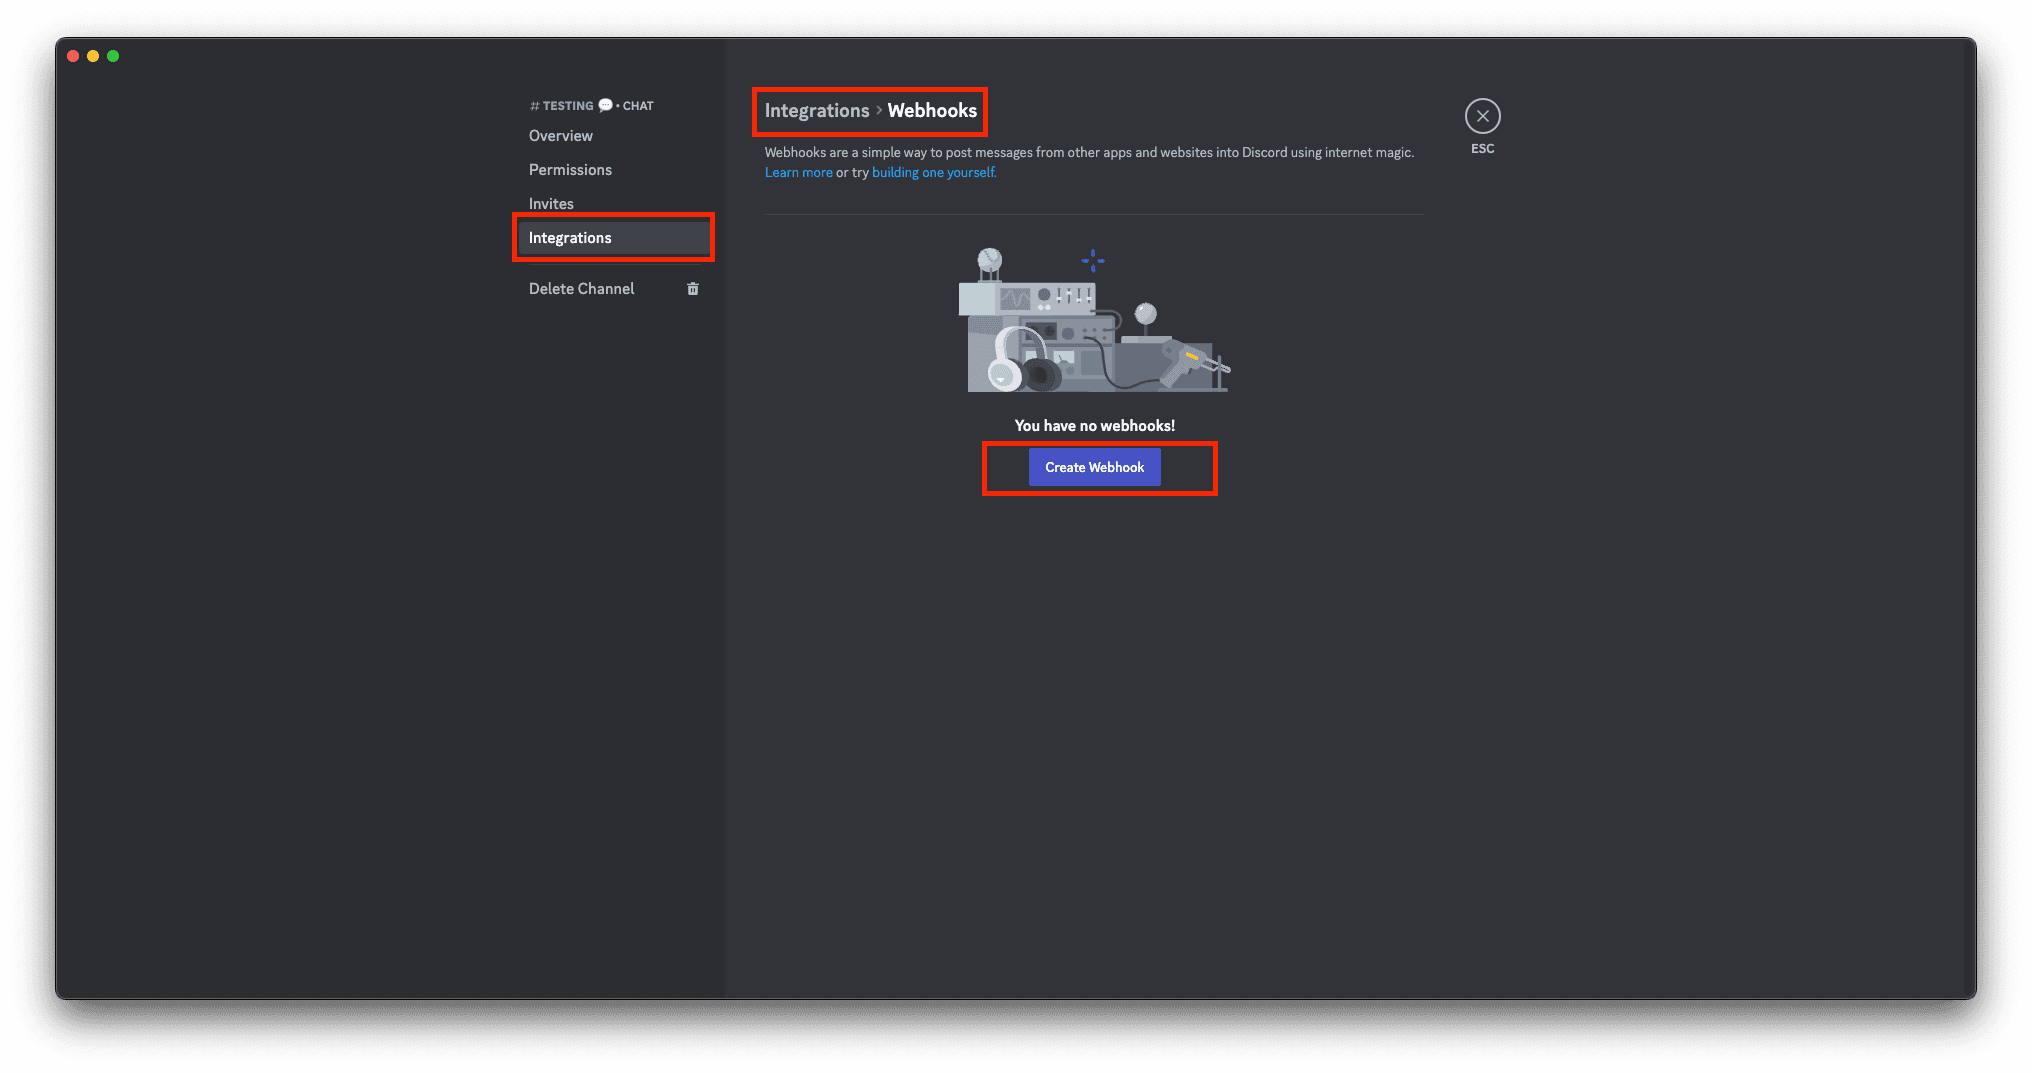 Discord with the Integration -> Webhooks and Create Webhook button highlighted.